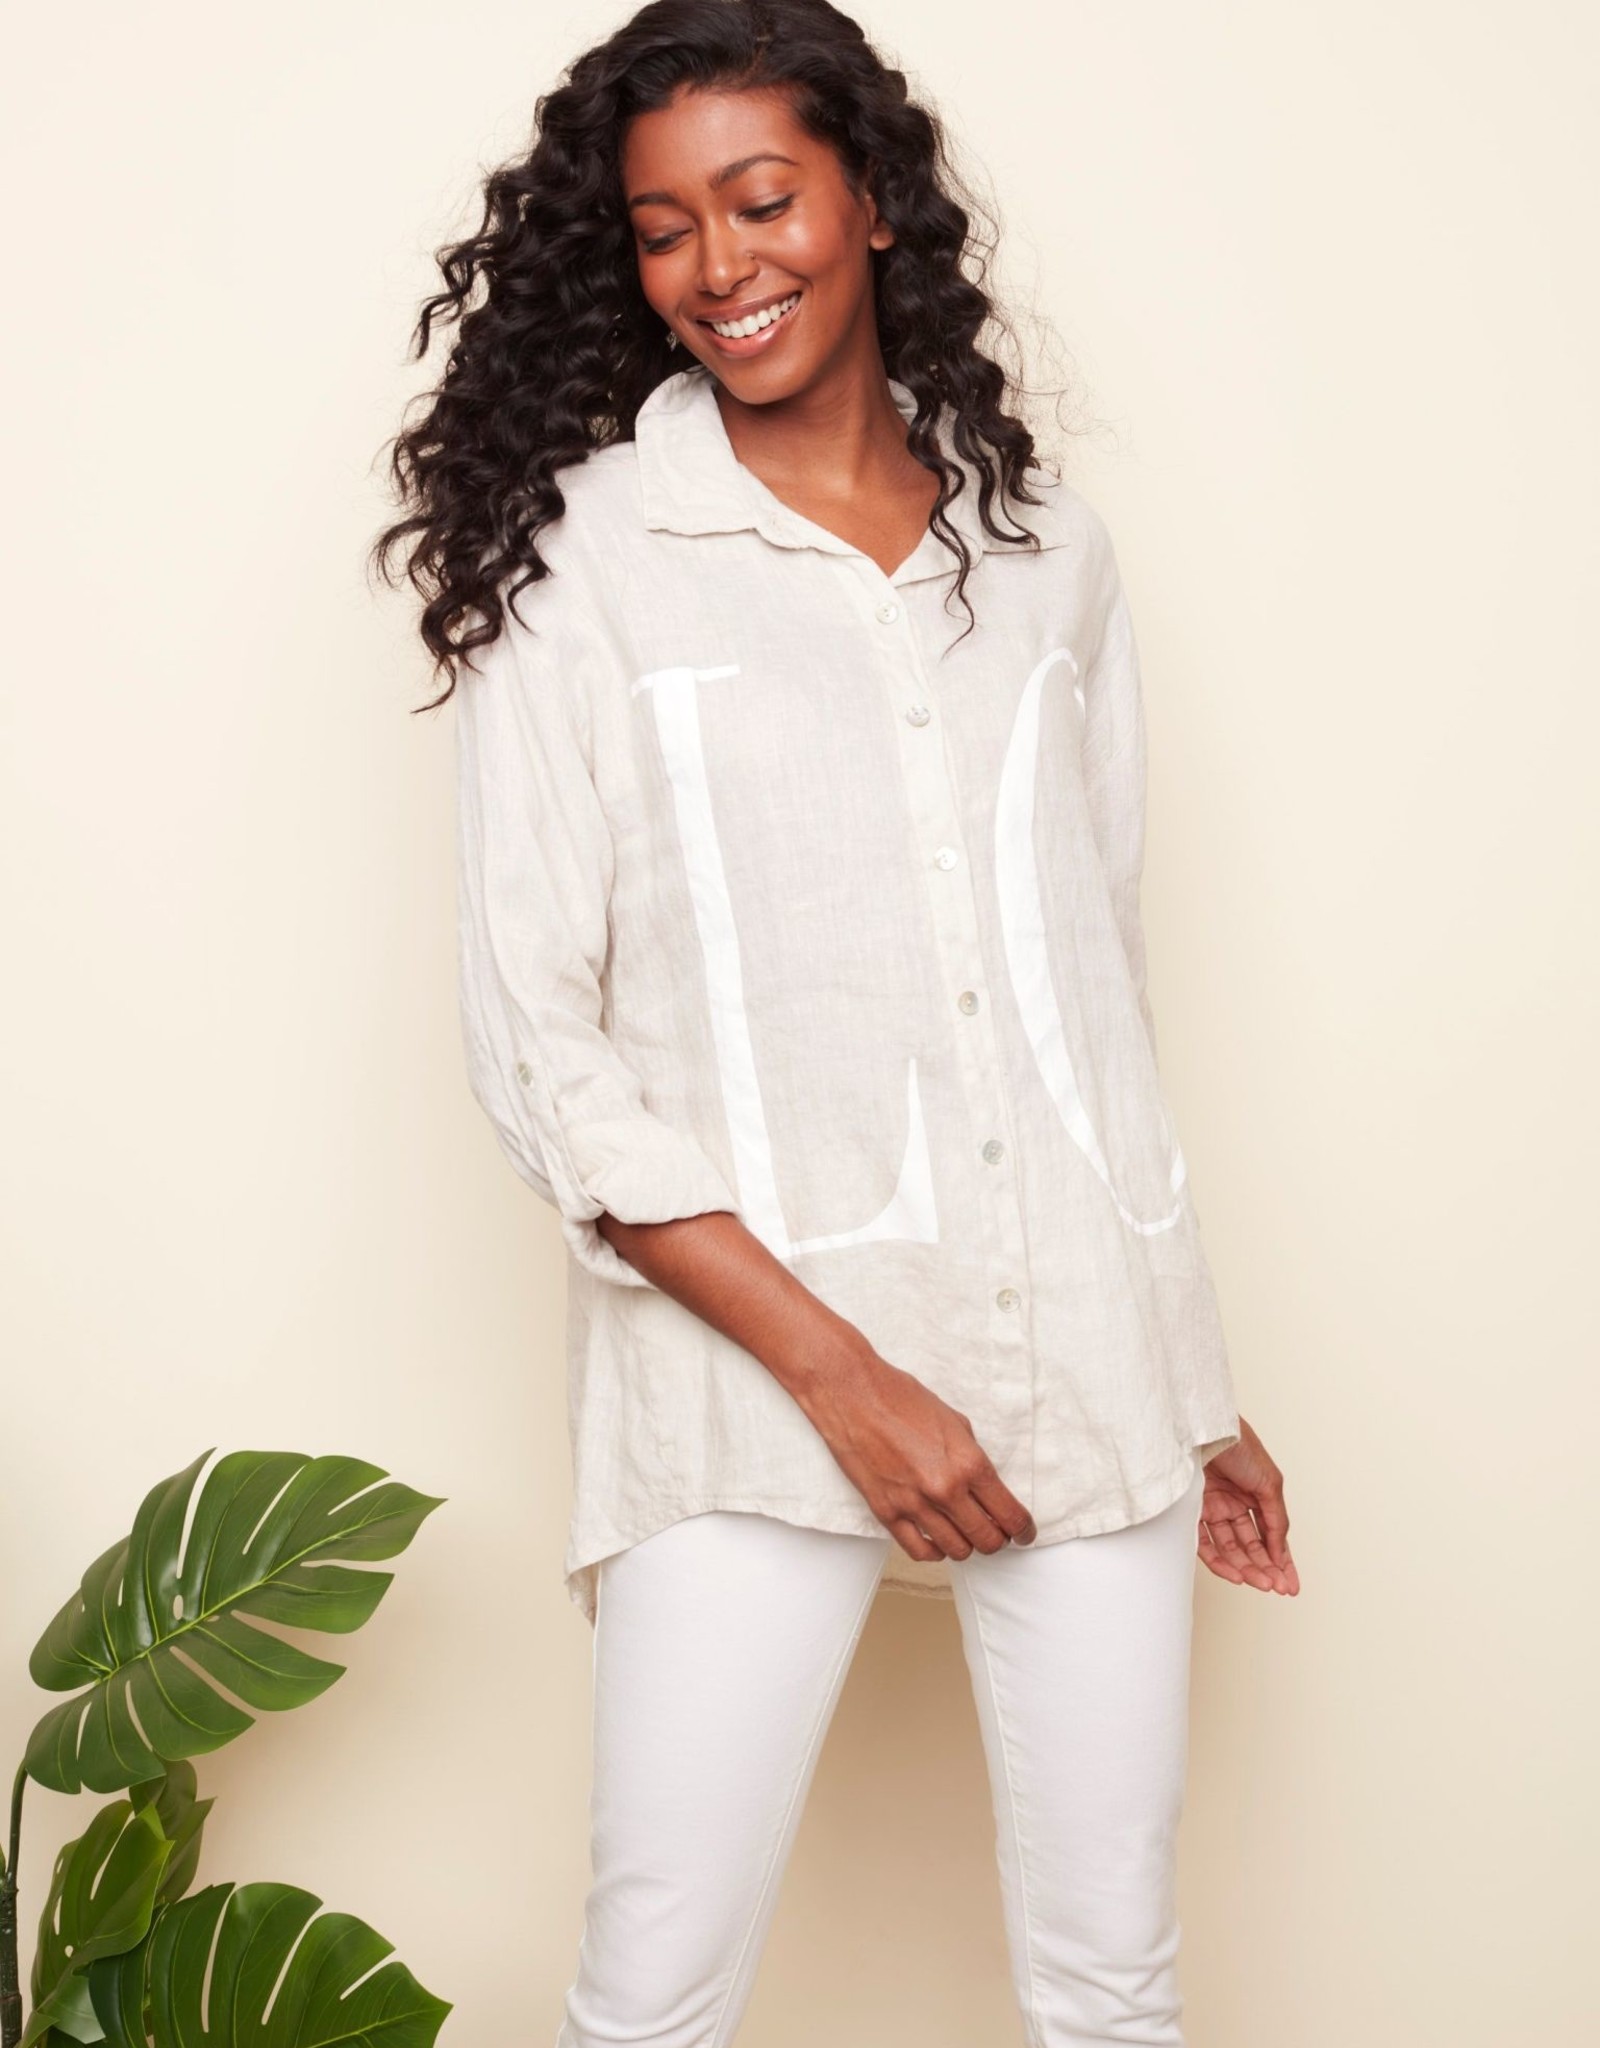 Charlie B Natural LOVE Linen Button-Up Tunic